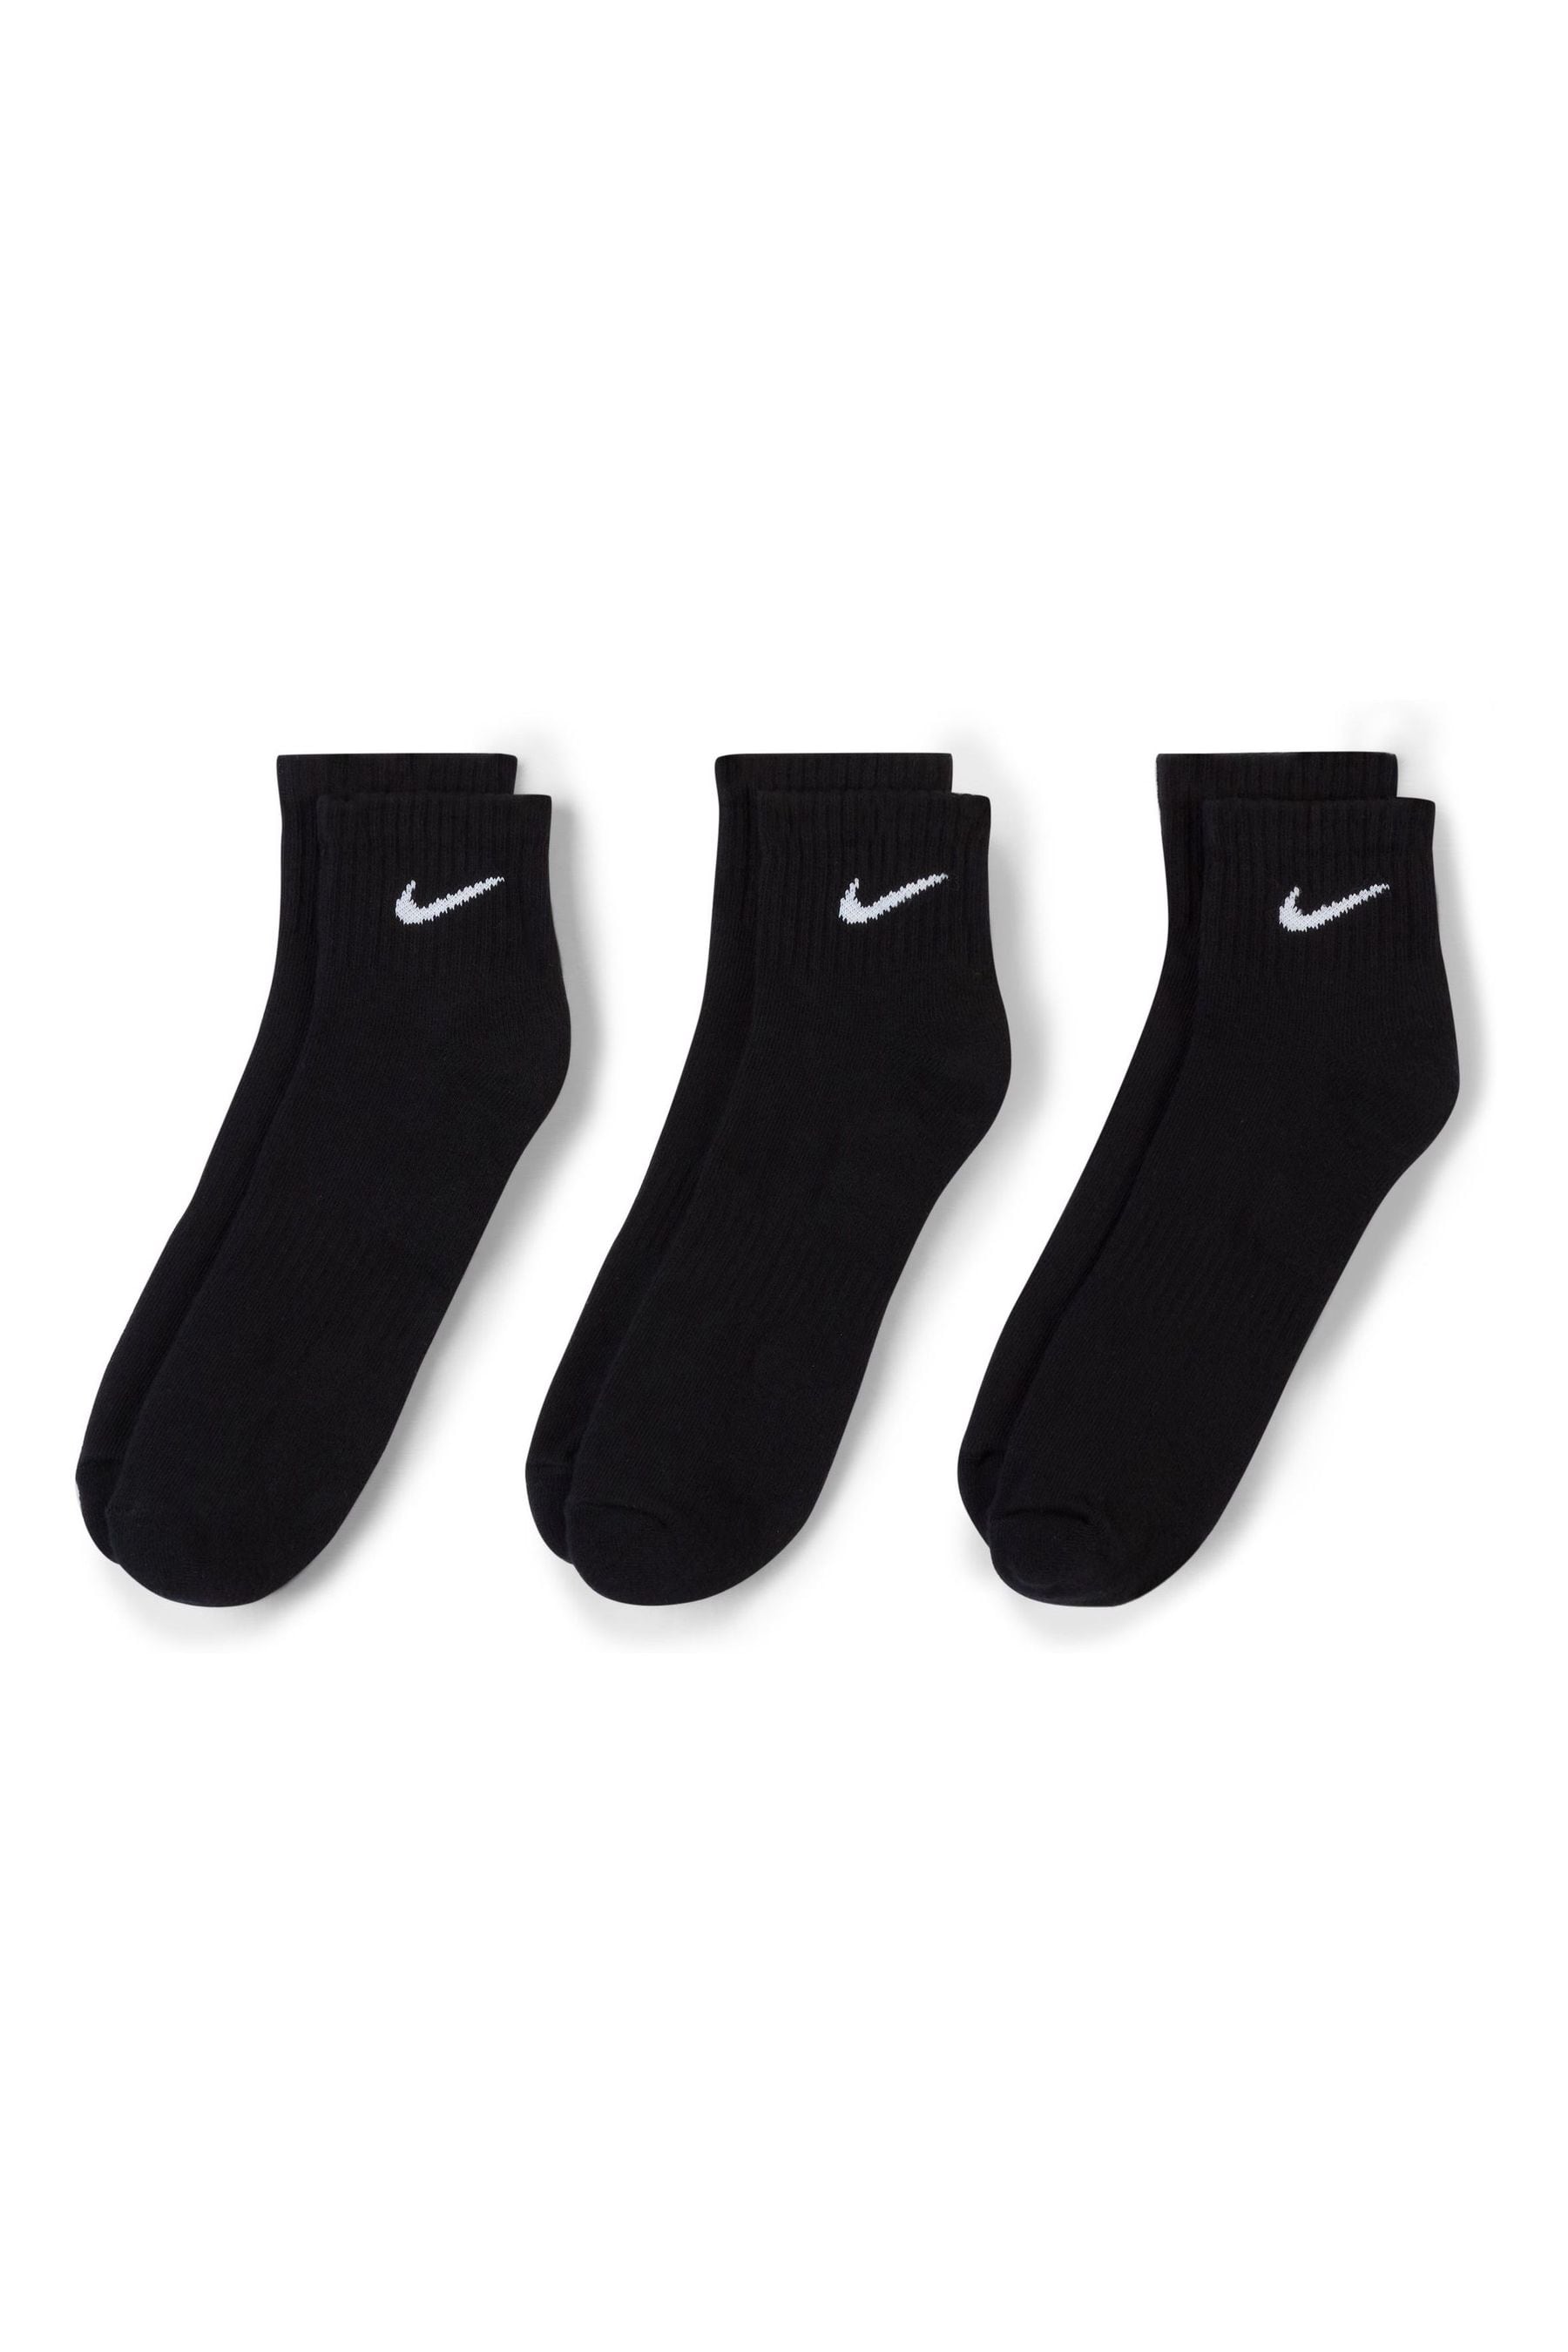 Buy Nike Black Everyday Cushioned Ankle 3pk from the Next UK online shop